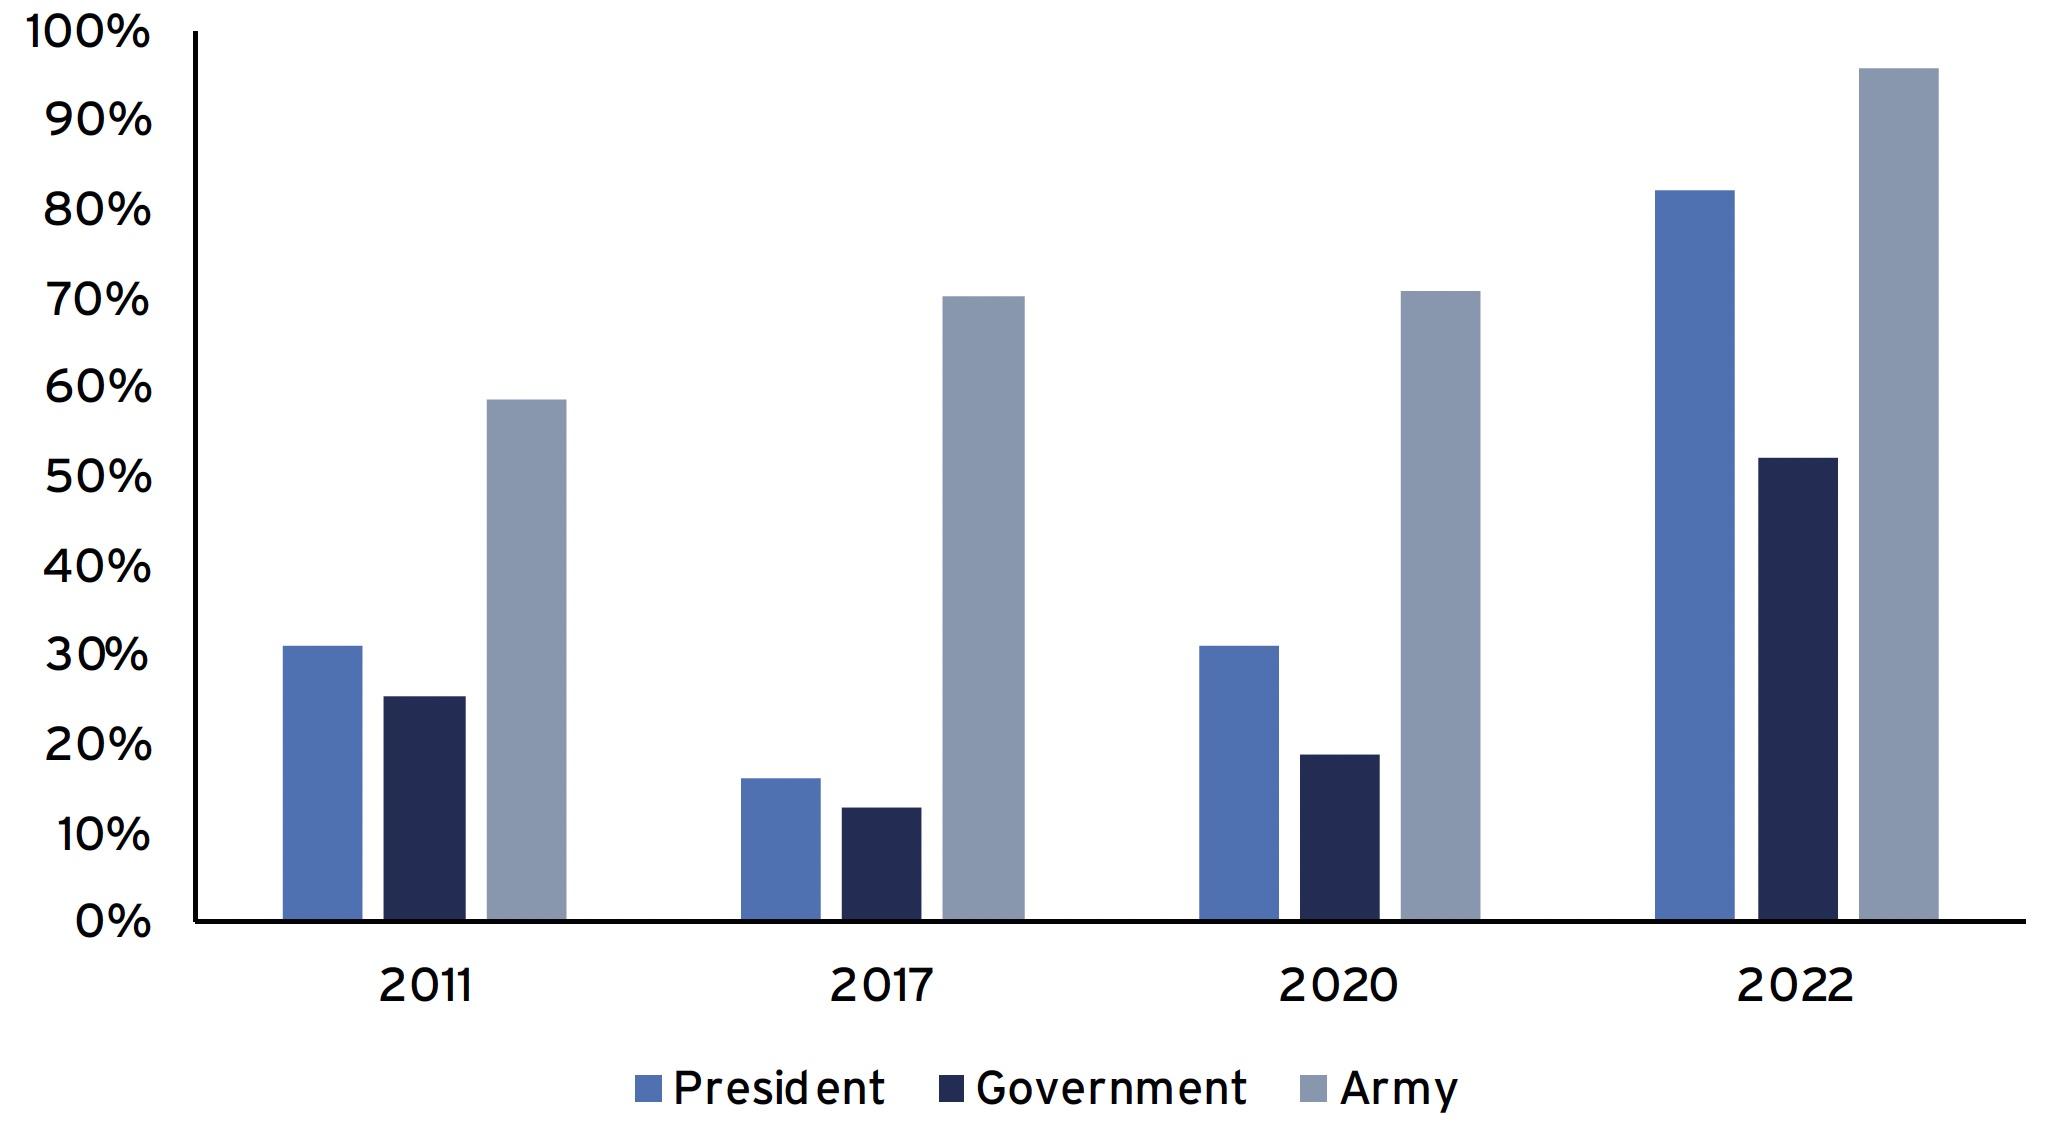 Figure 2  Increased support for president, government, and army since Russia’s invasion